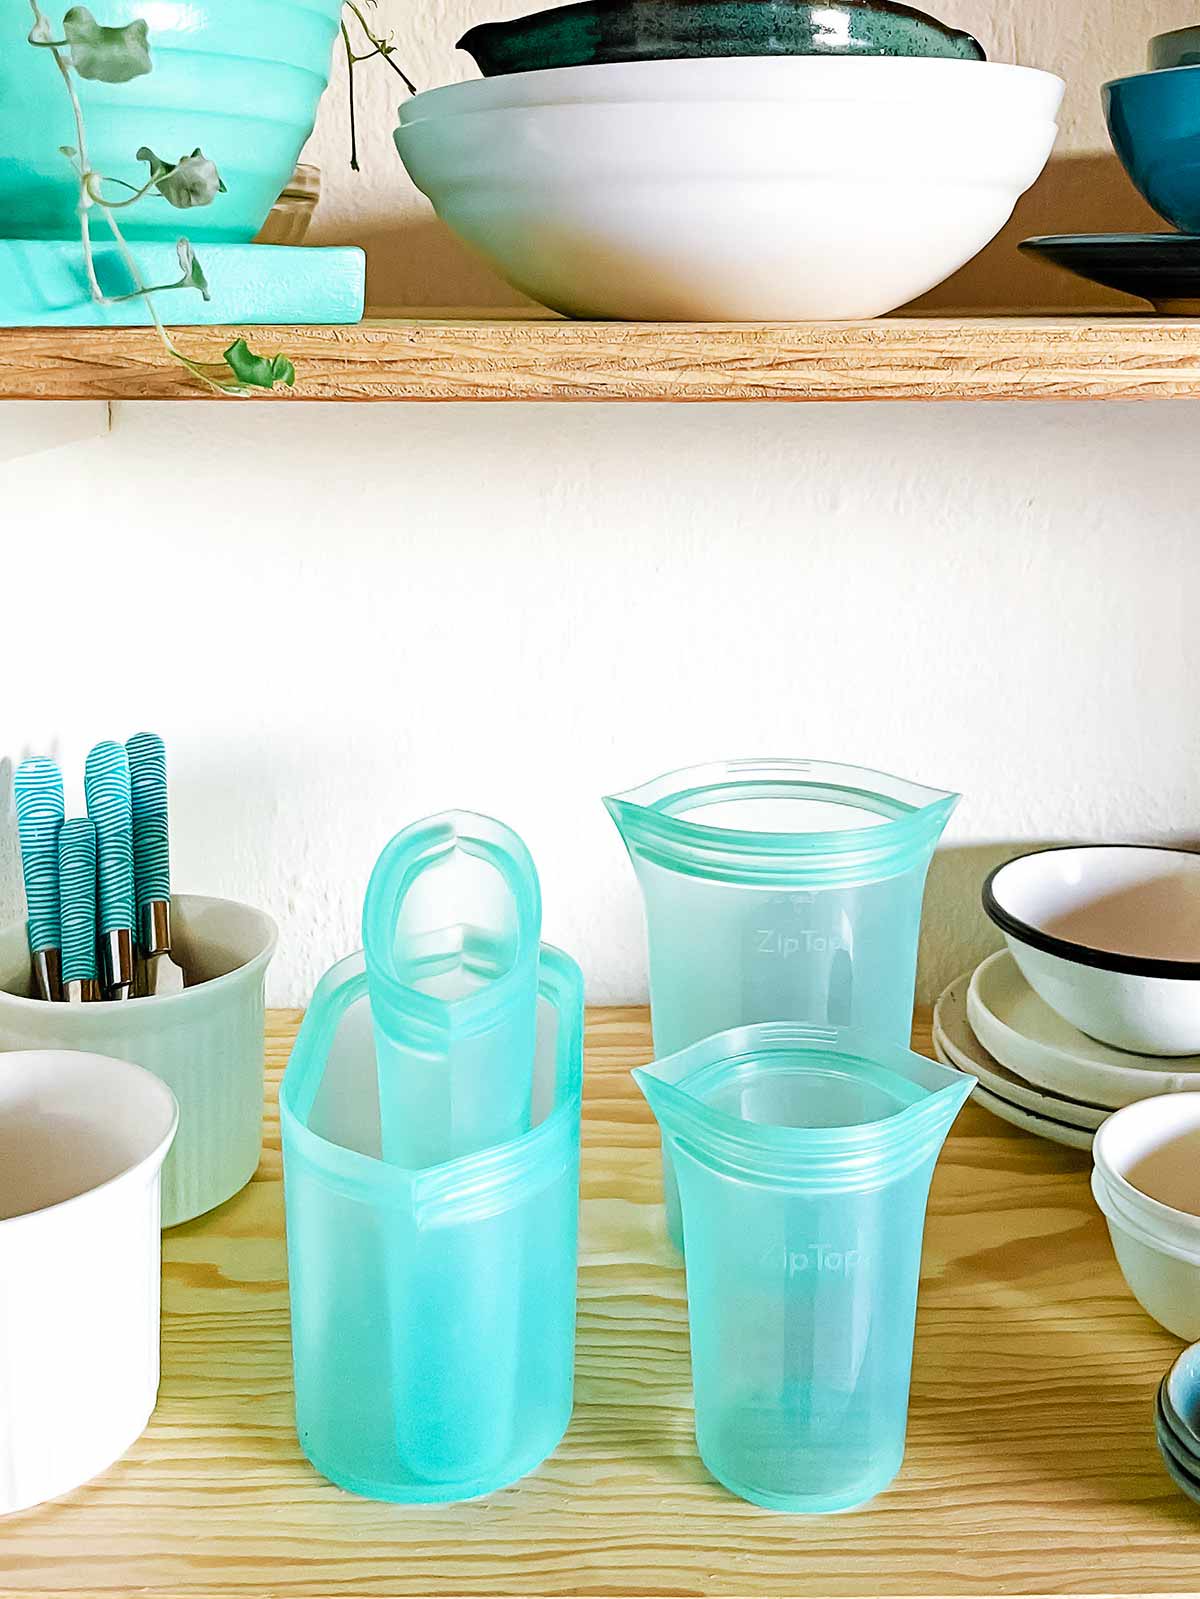 Teal Zip Top containers in shelf with other white and teal containers